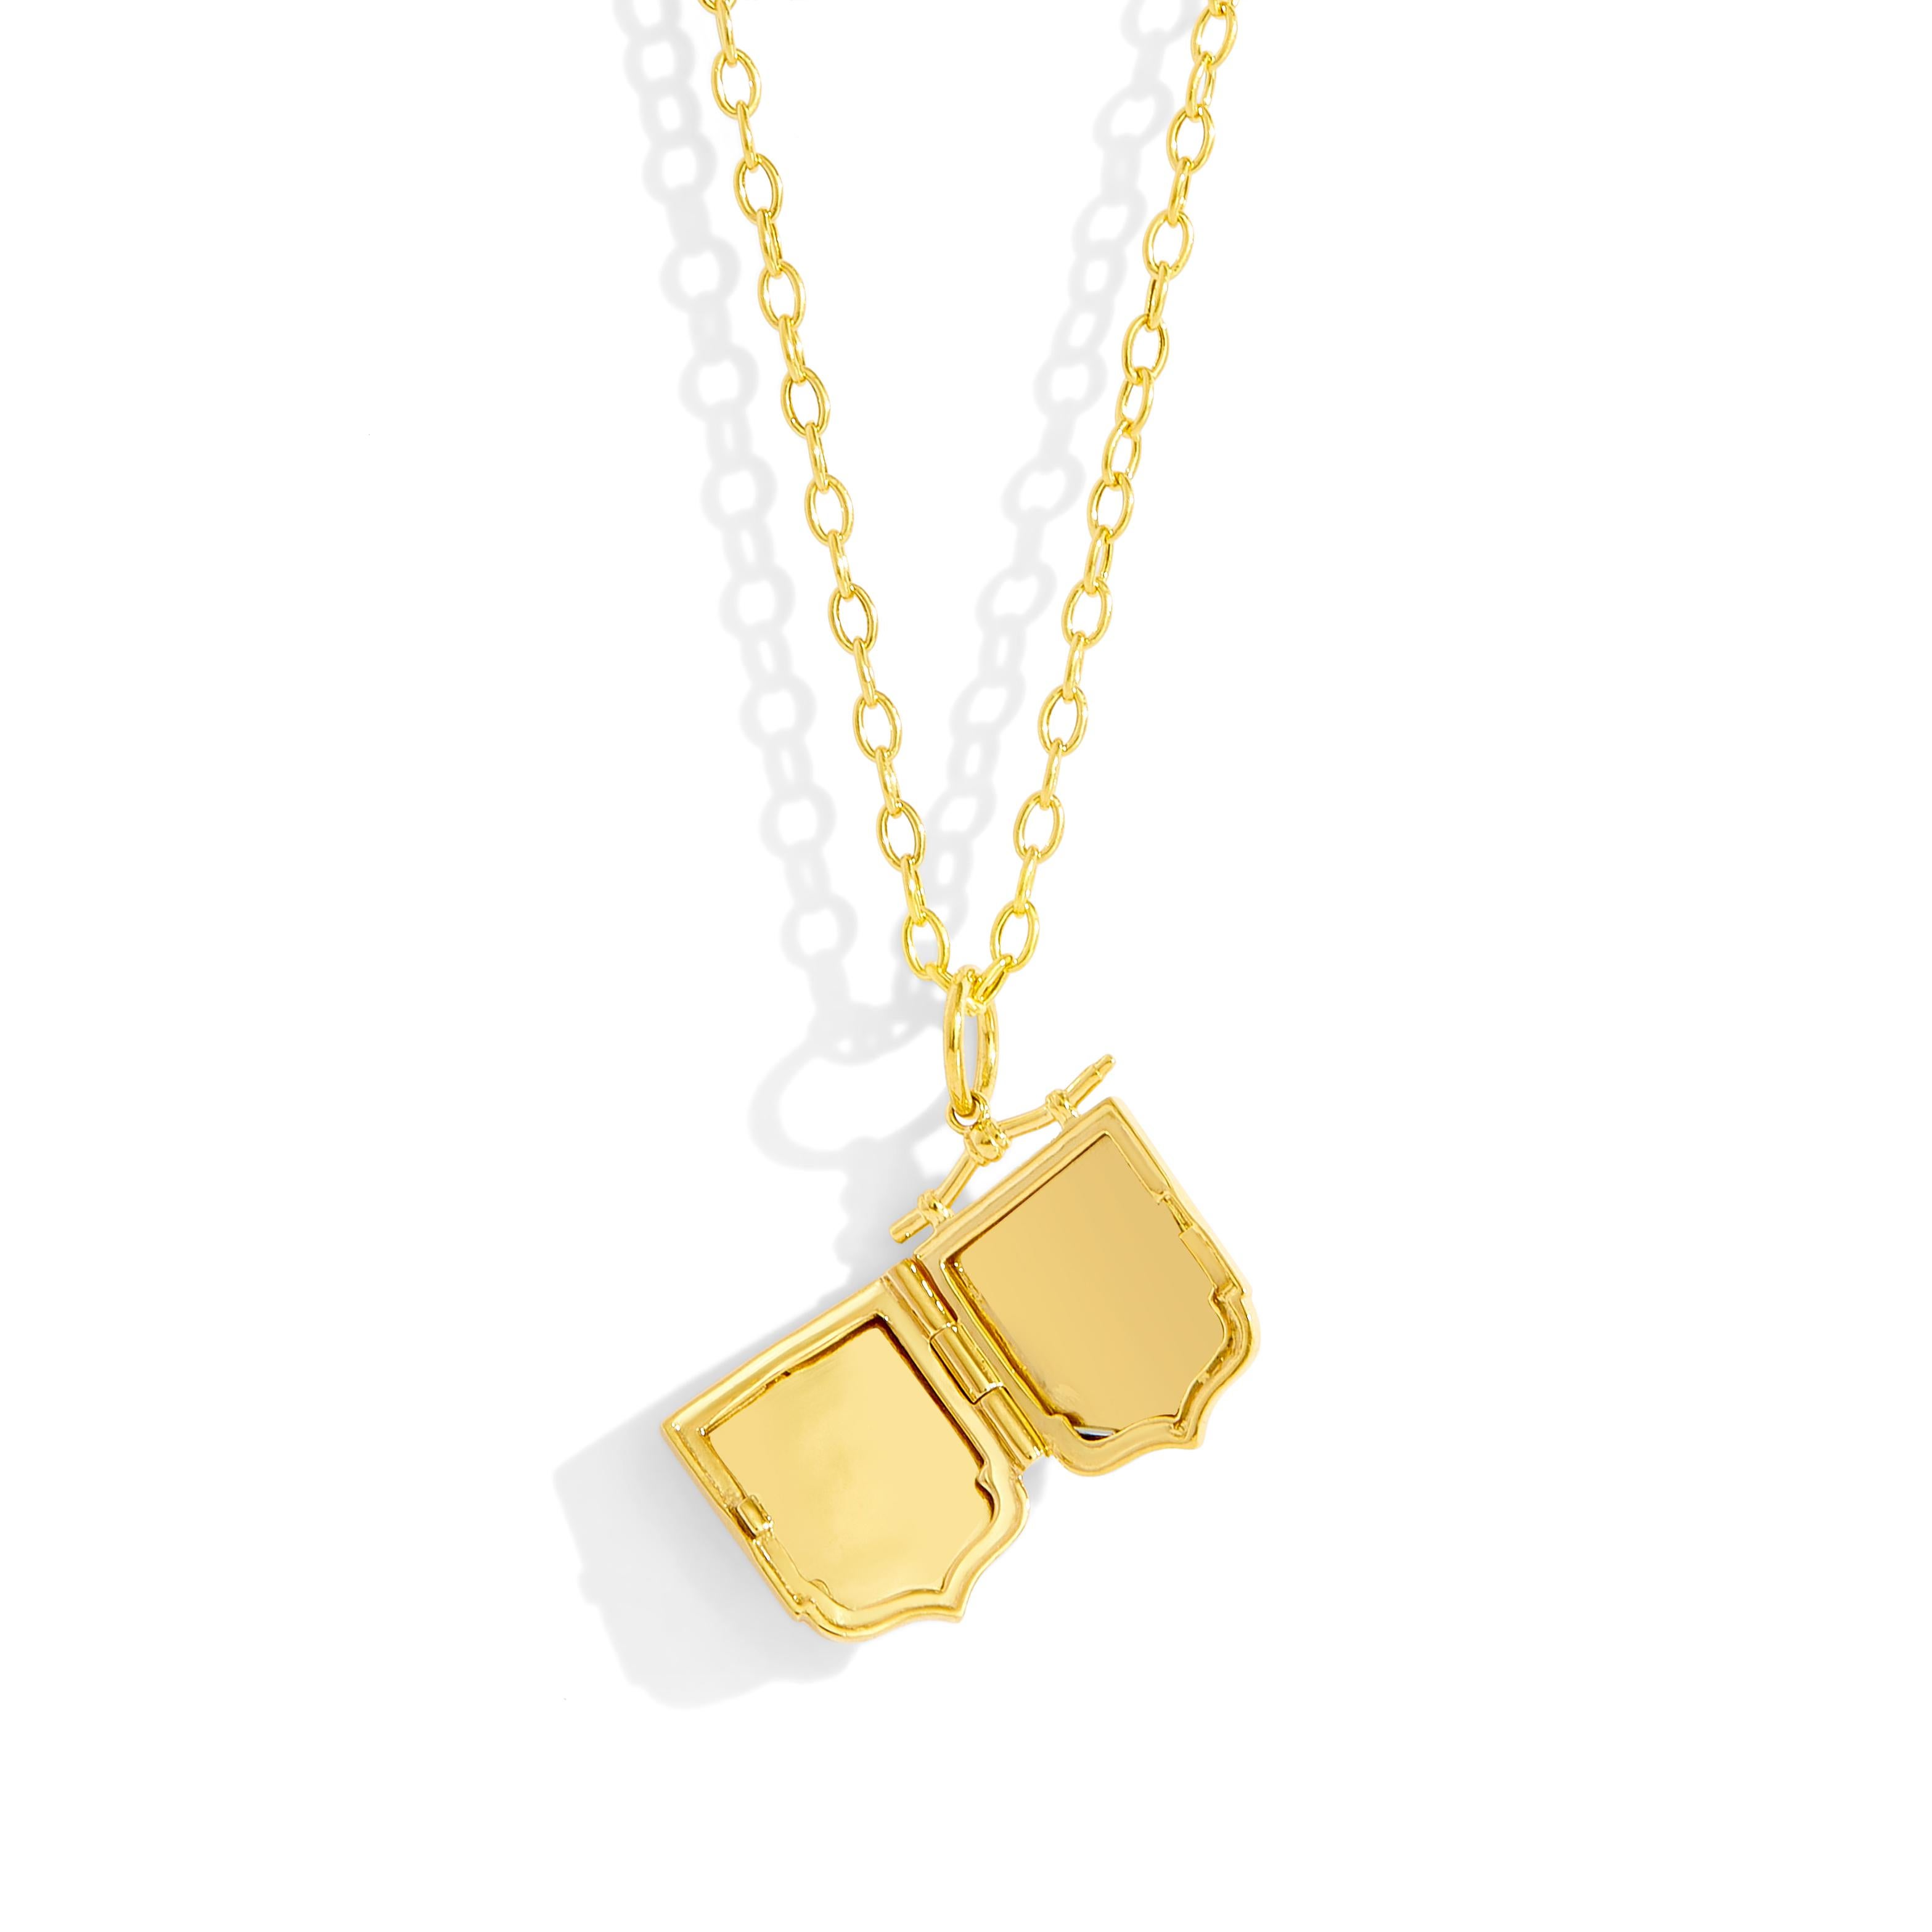 Created in 18 karat yellow gold
Diamonds 0.20 carat approx.
Chain sold separately 
Limited edition

Expertly crafted from 18 karat yellow gold, this luxurious pendant features a diamond centerpiece of 0.20 carats. Chain is sold separately and a